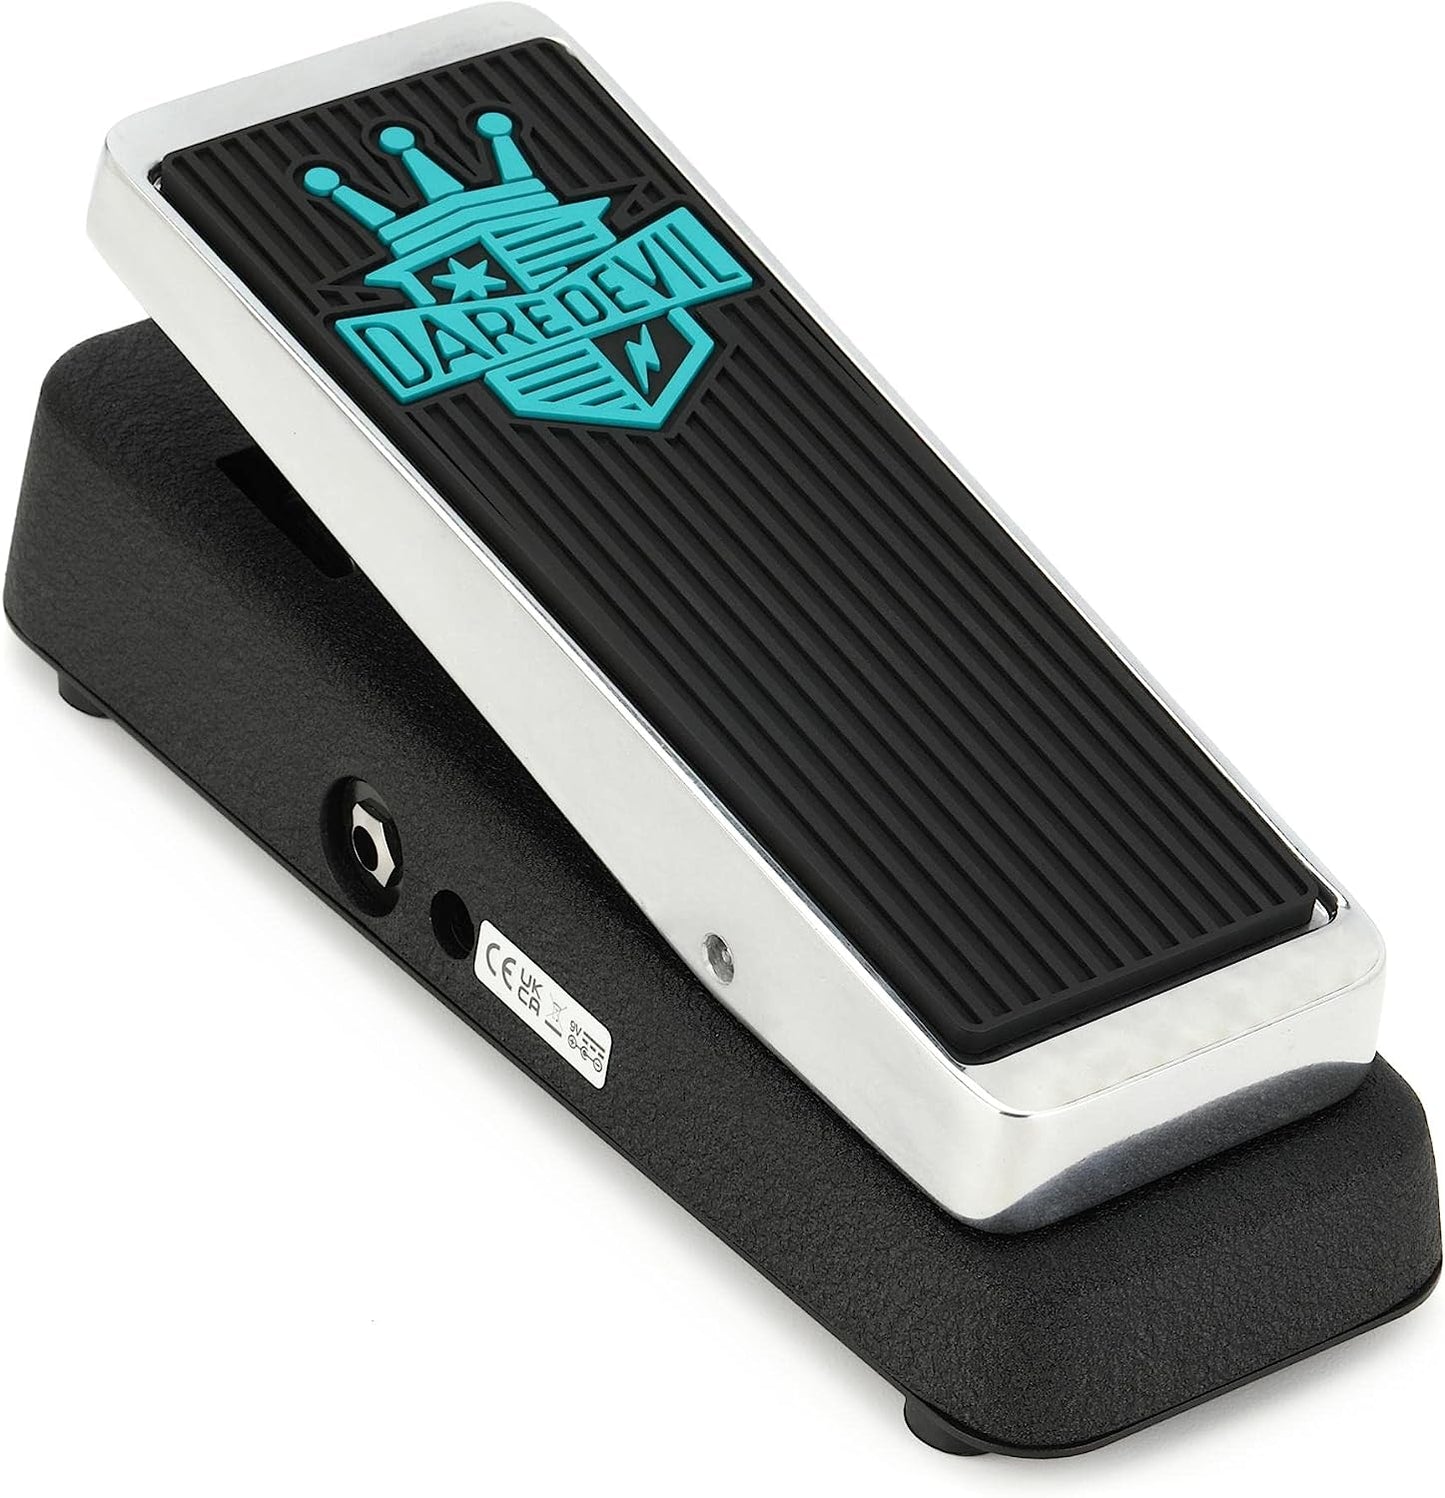 Dunlop Cry Baby Daredevil Fuzz Wah Pedal